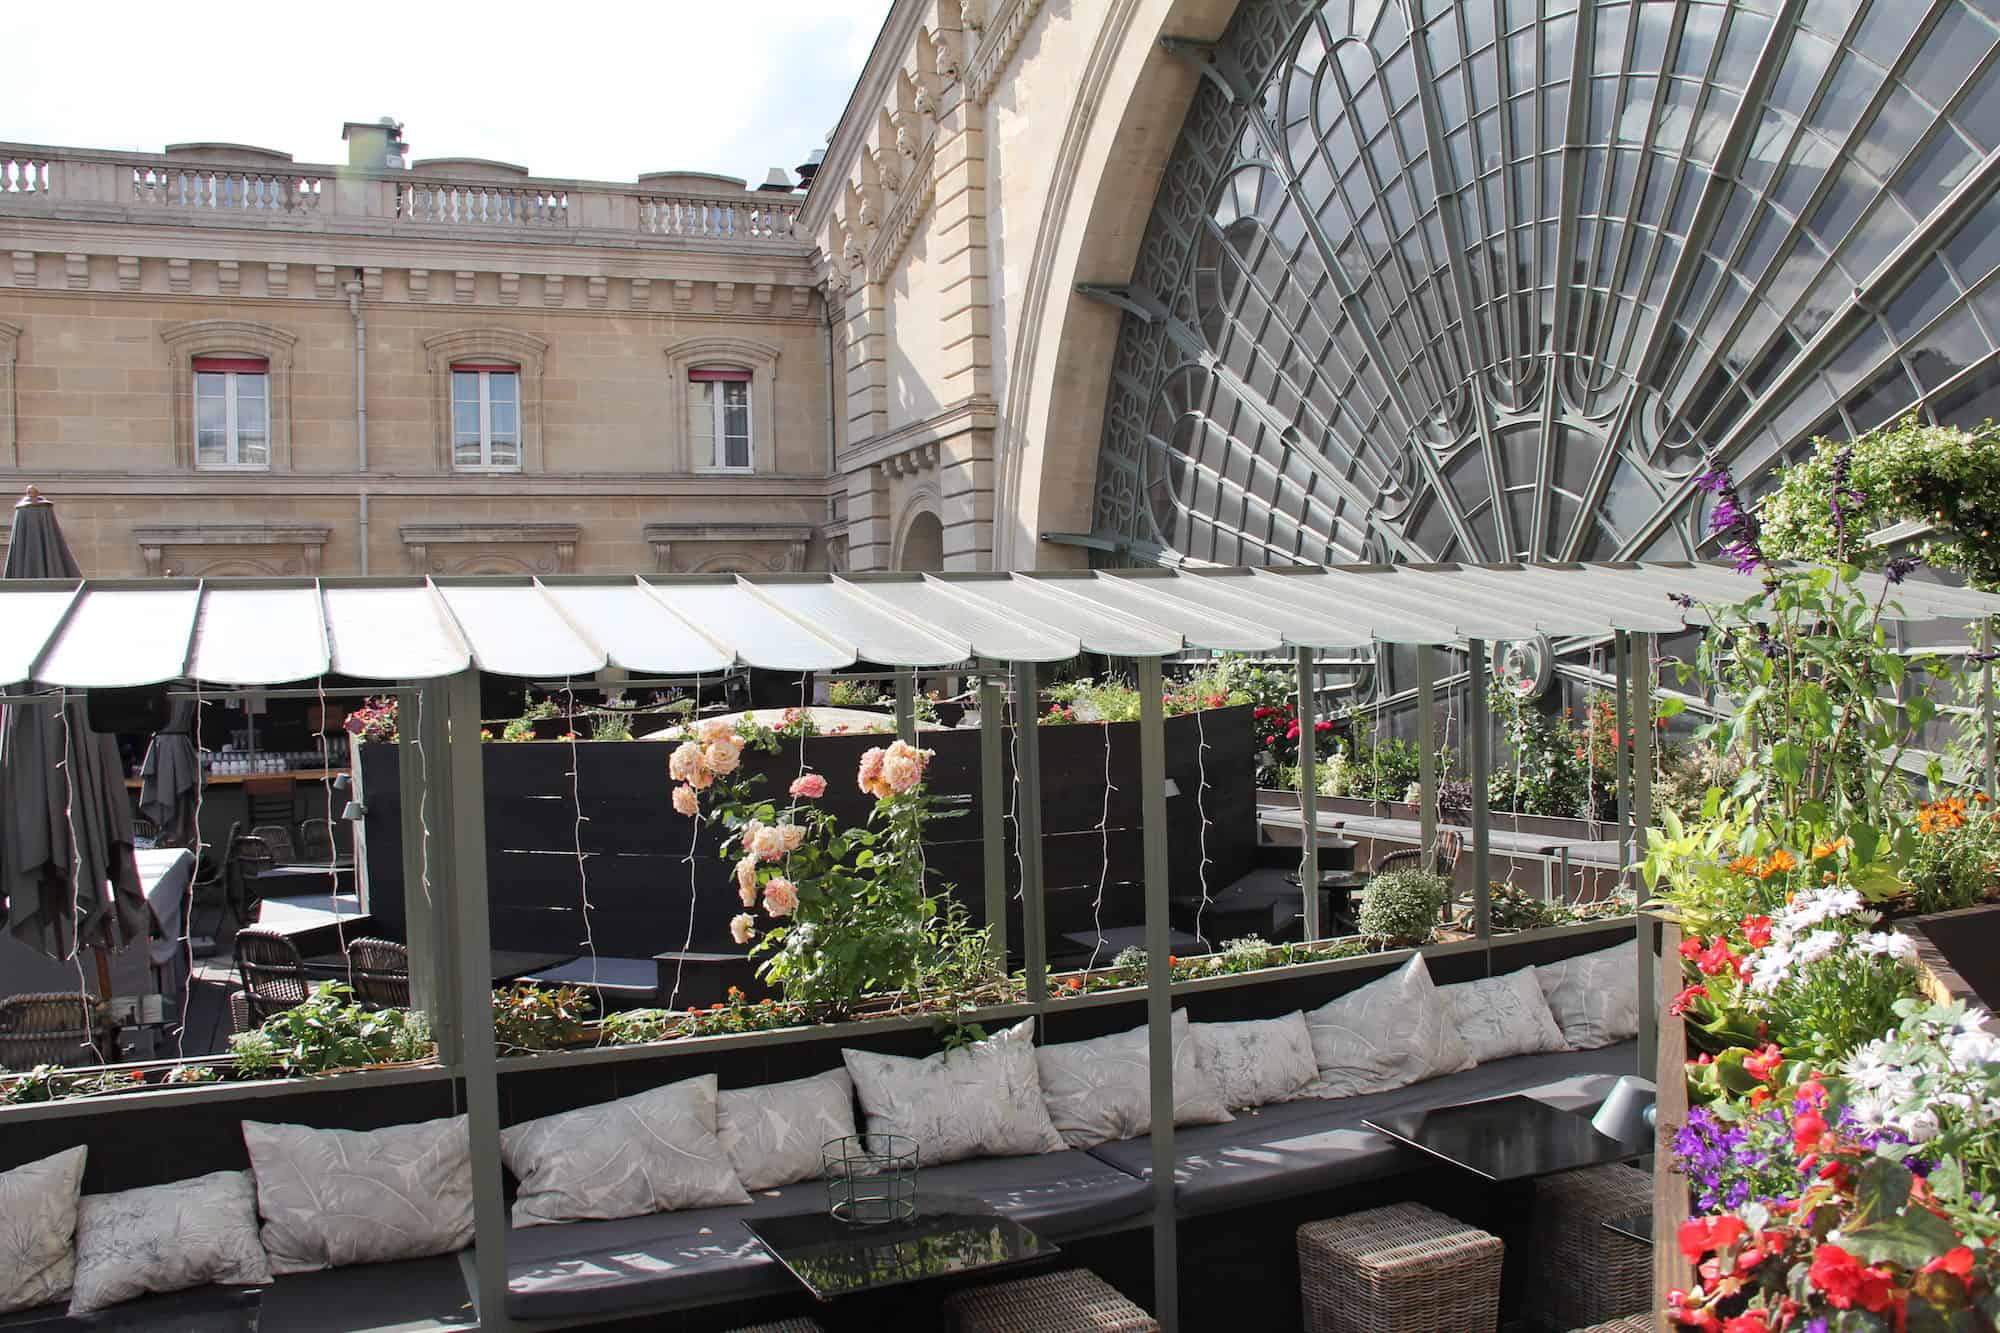 HiP Paris Blog go-to rooftop bar in Paris is Le Perchoir at Gare de l'Est with his flower gardens and relaxed atmosphere.